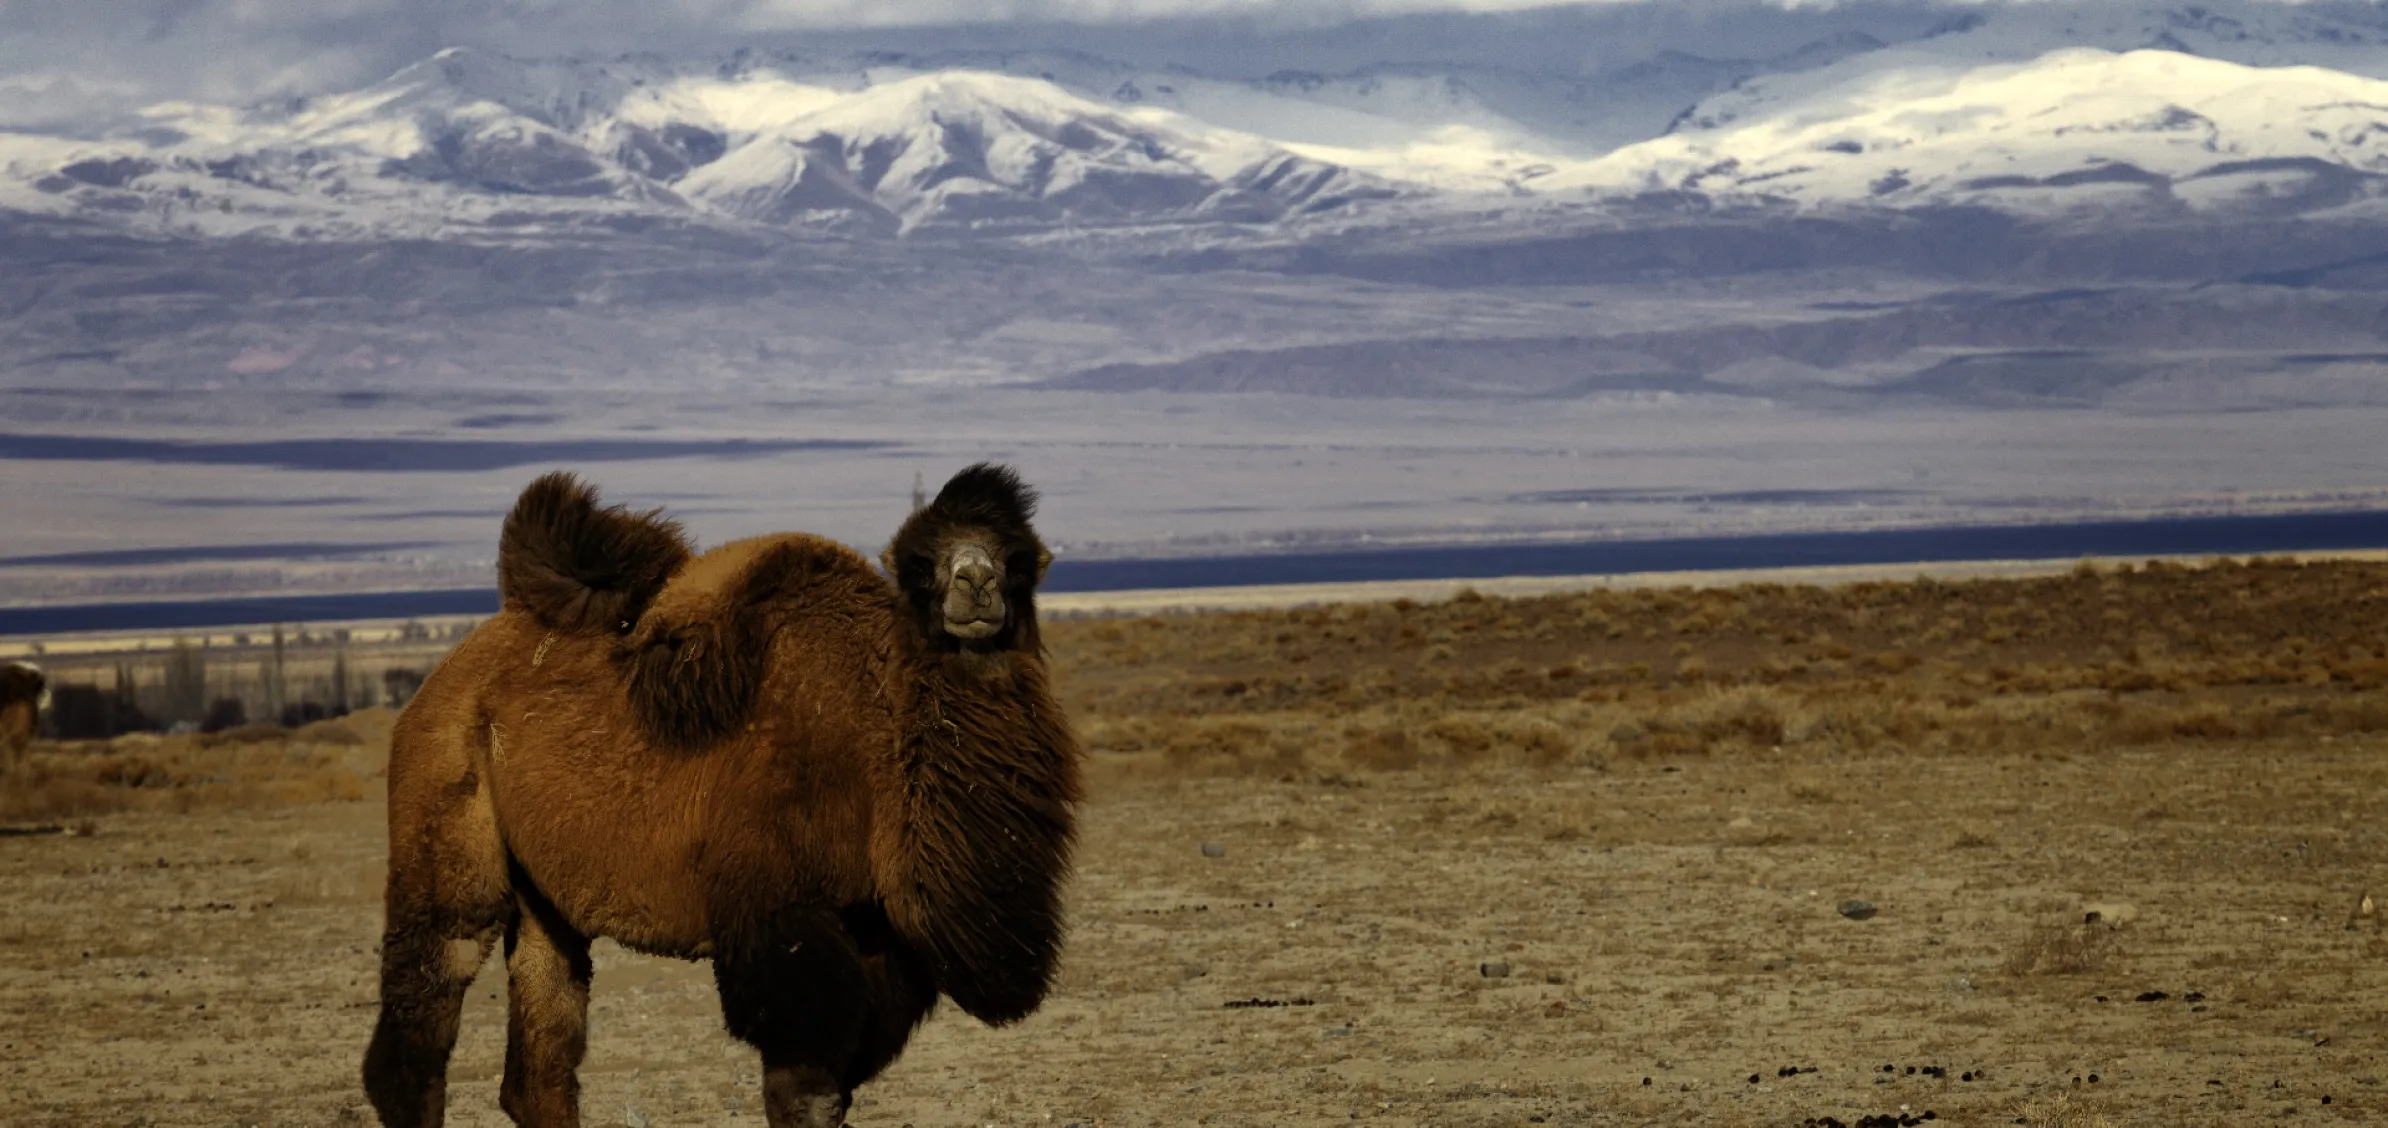 Bactrian camel on the shore of Issyk Kul lake